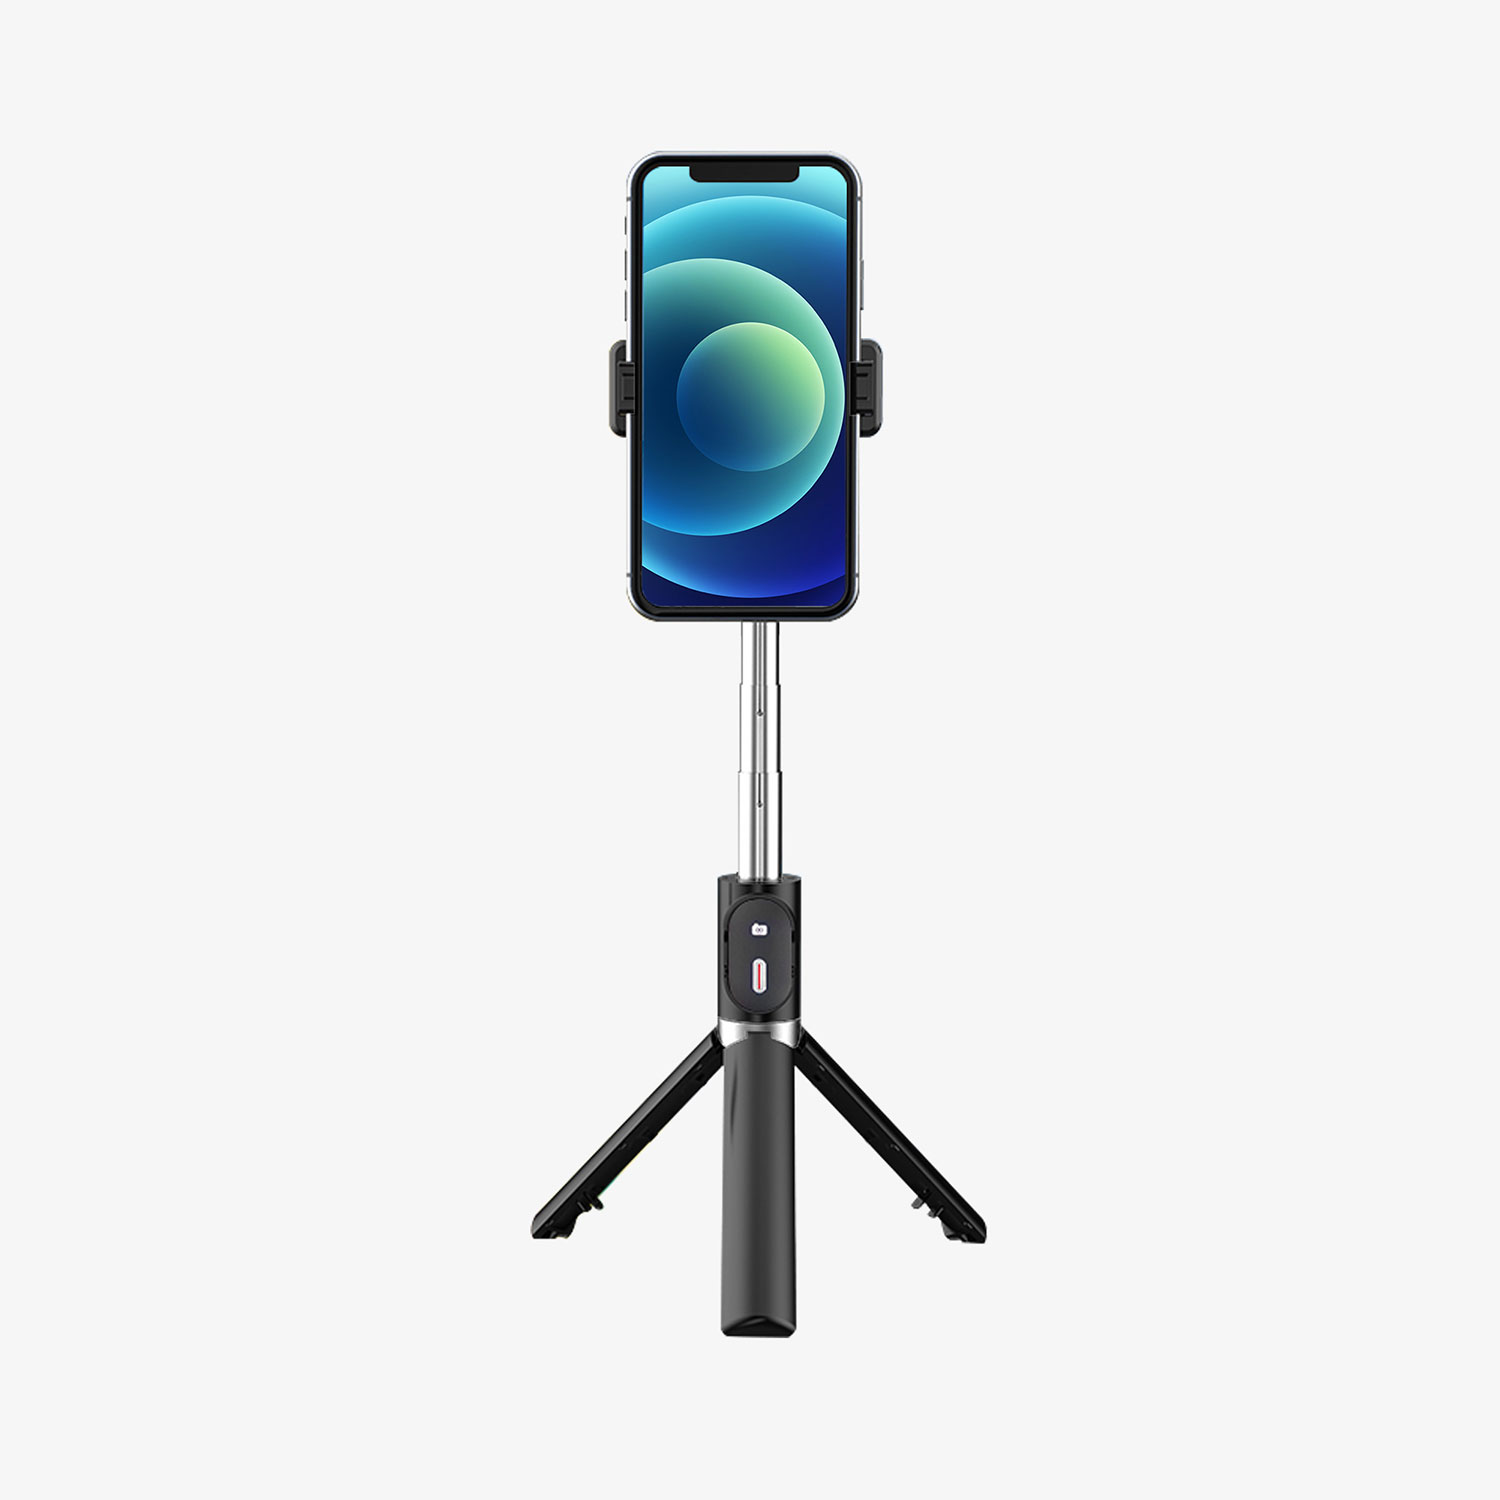 Extendable phone tripod stand